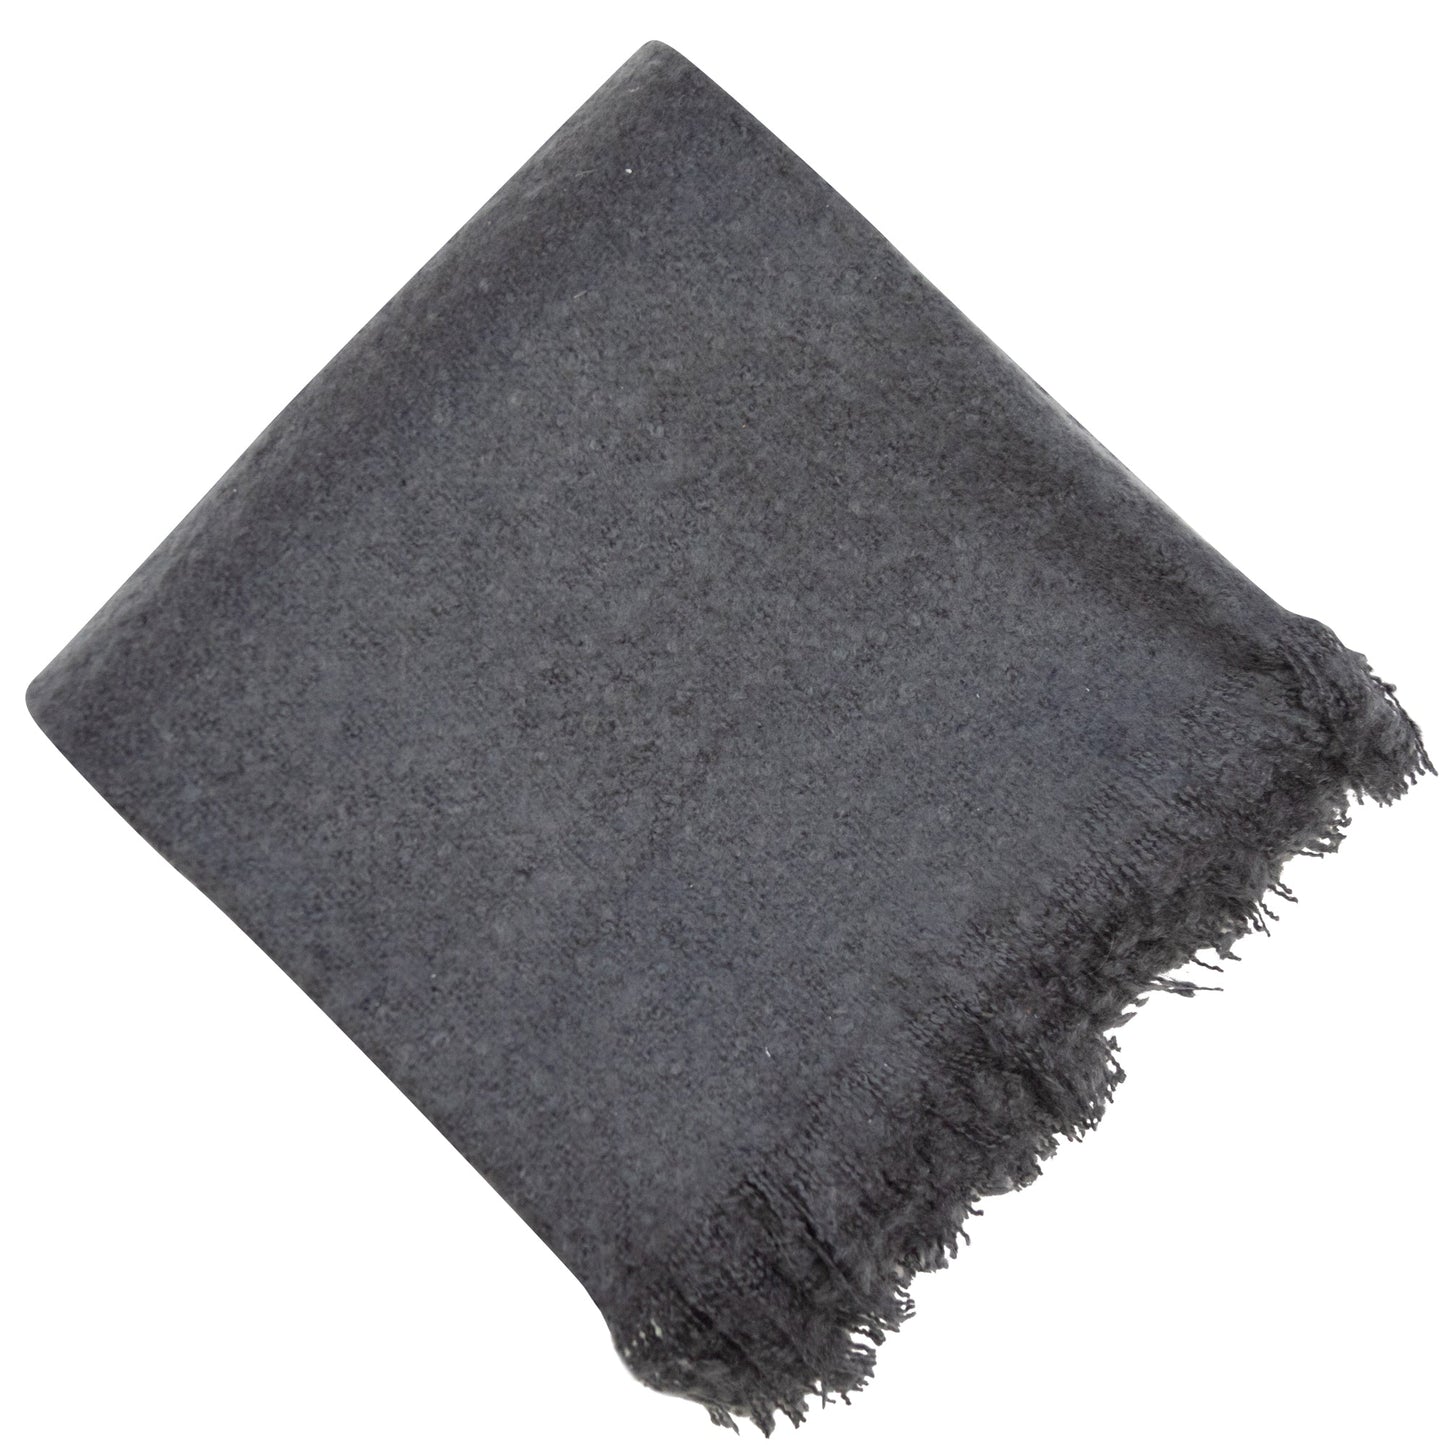 FAUX THICK MOHAIR THROW SLATE 130 X 180

Size: 130 X 180 cm